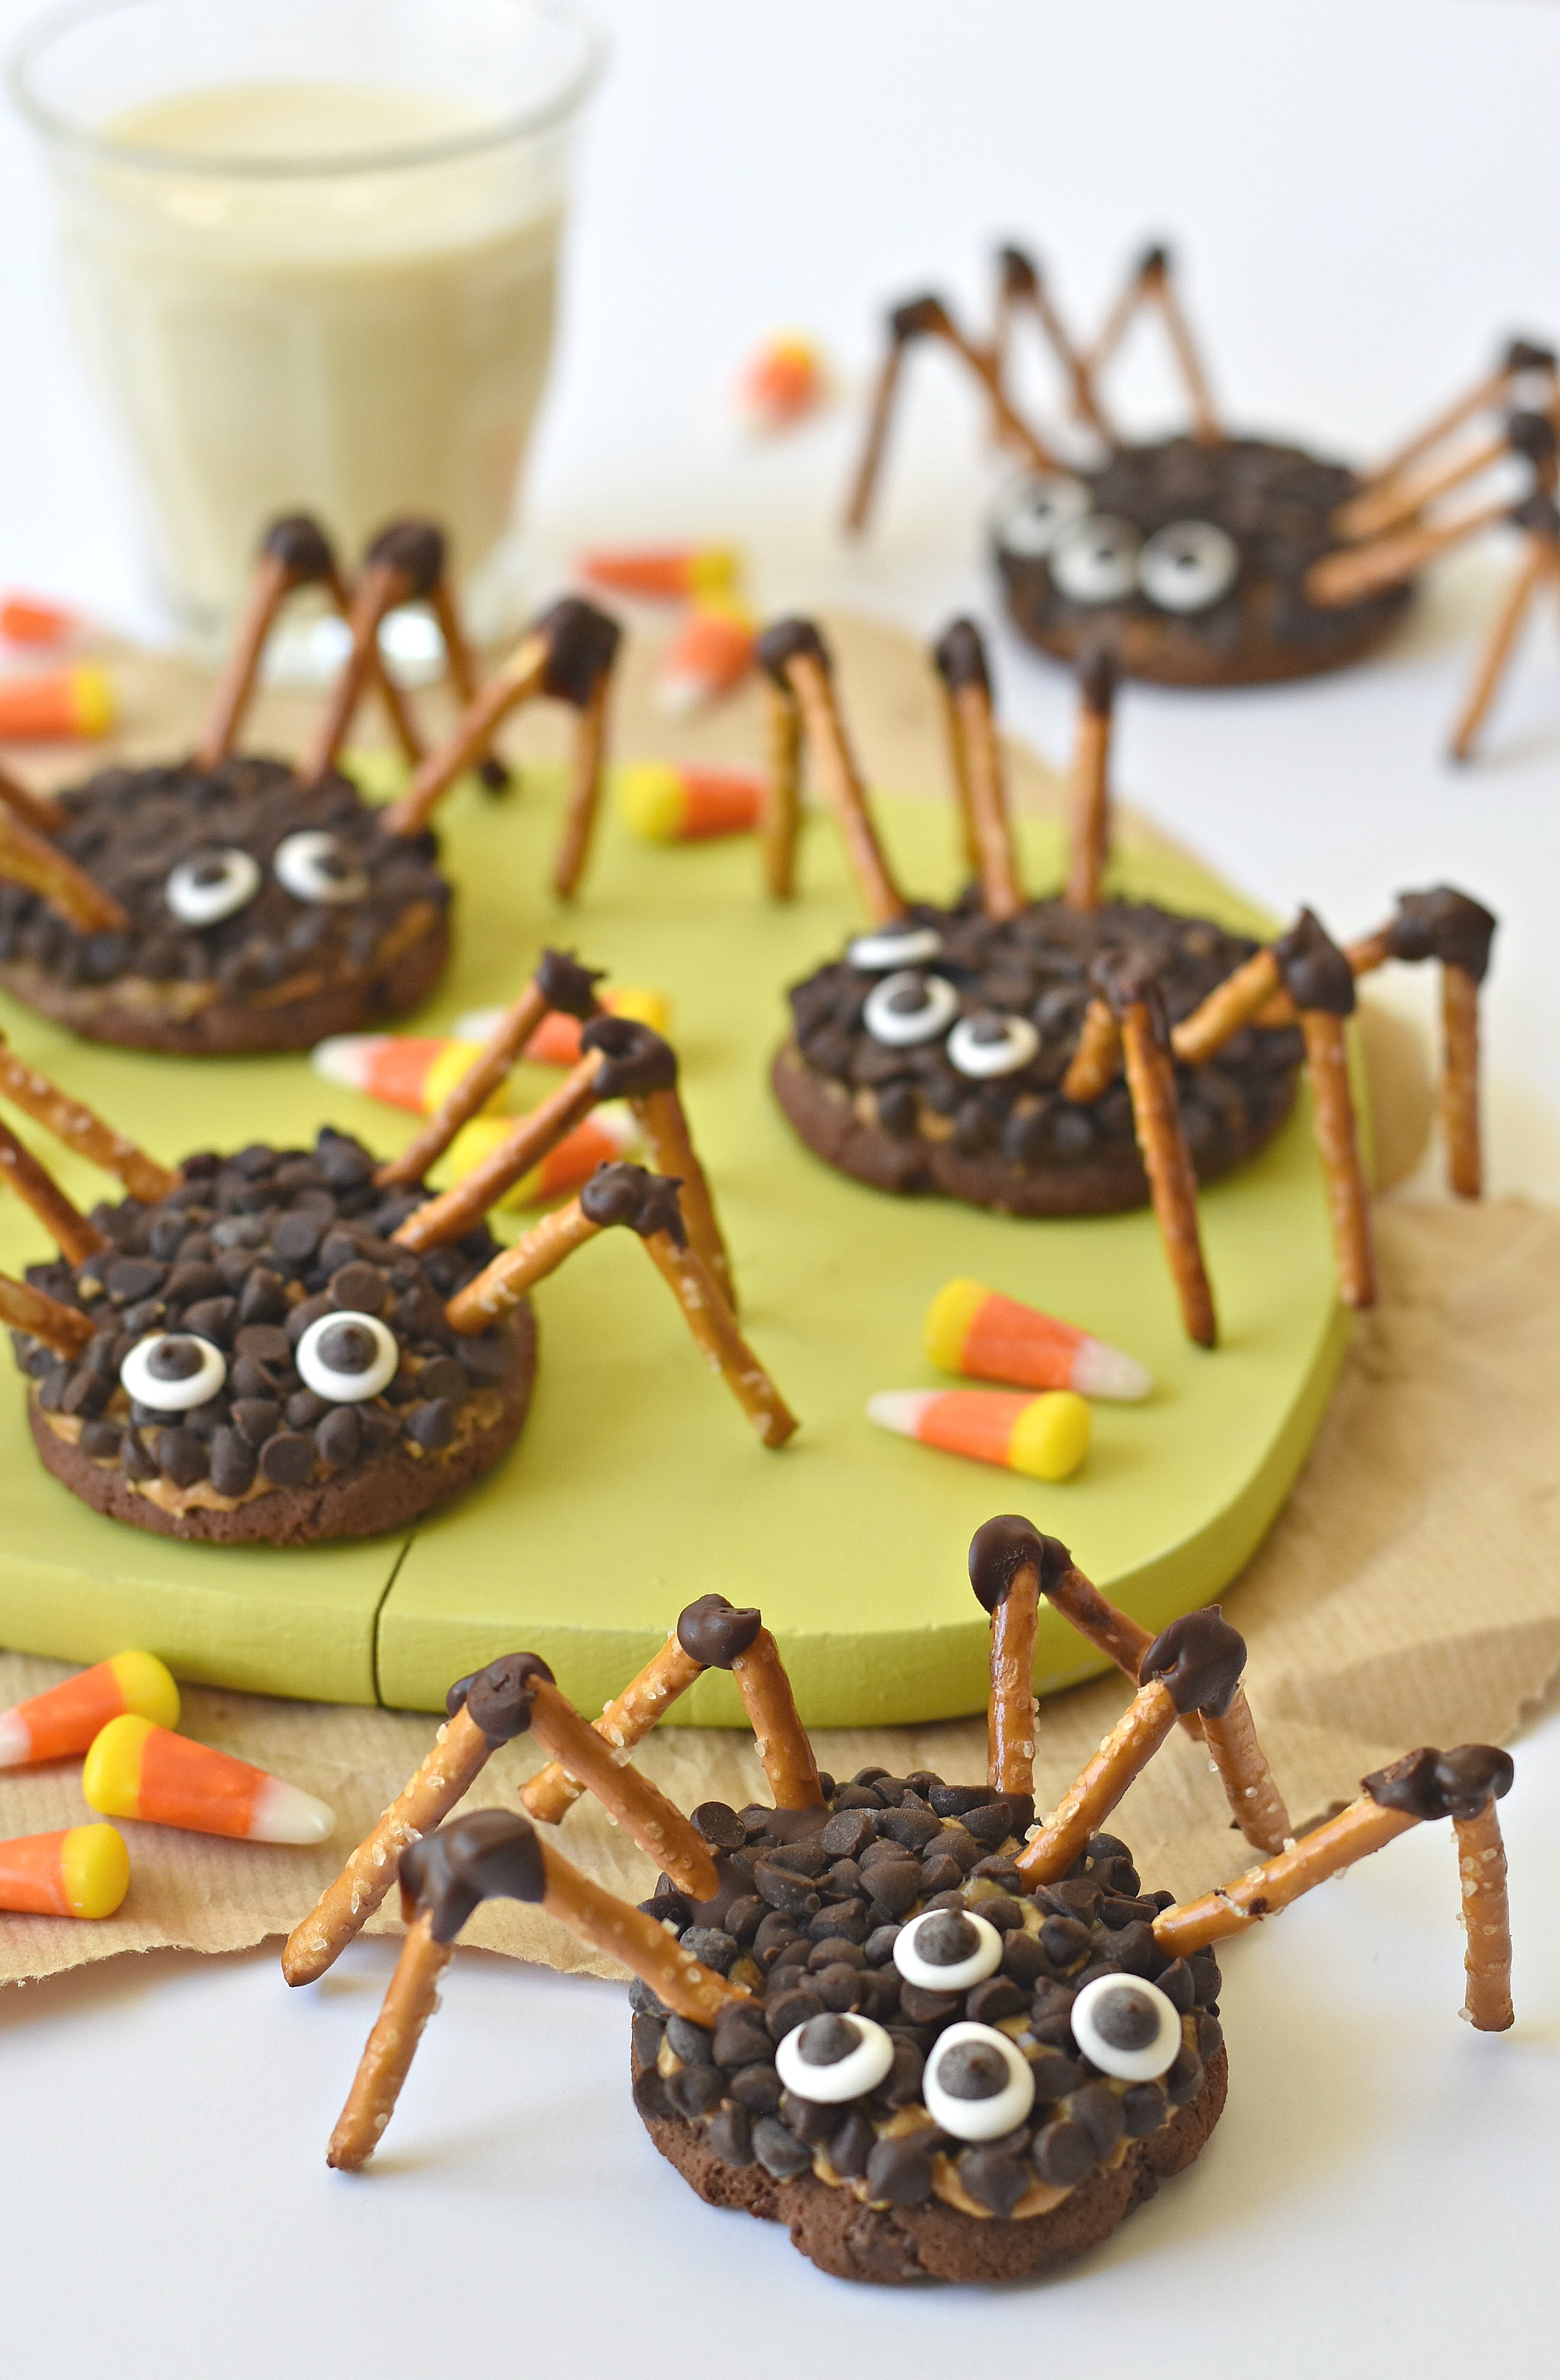 Your kitchen has been infested with the cutest and most edible ...